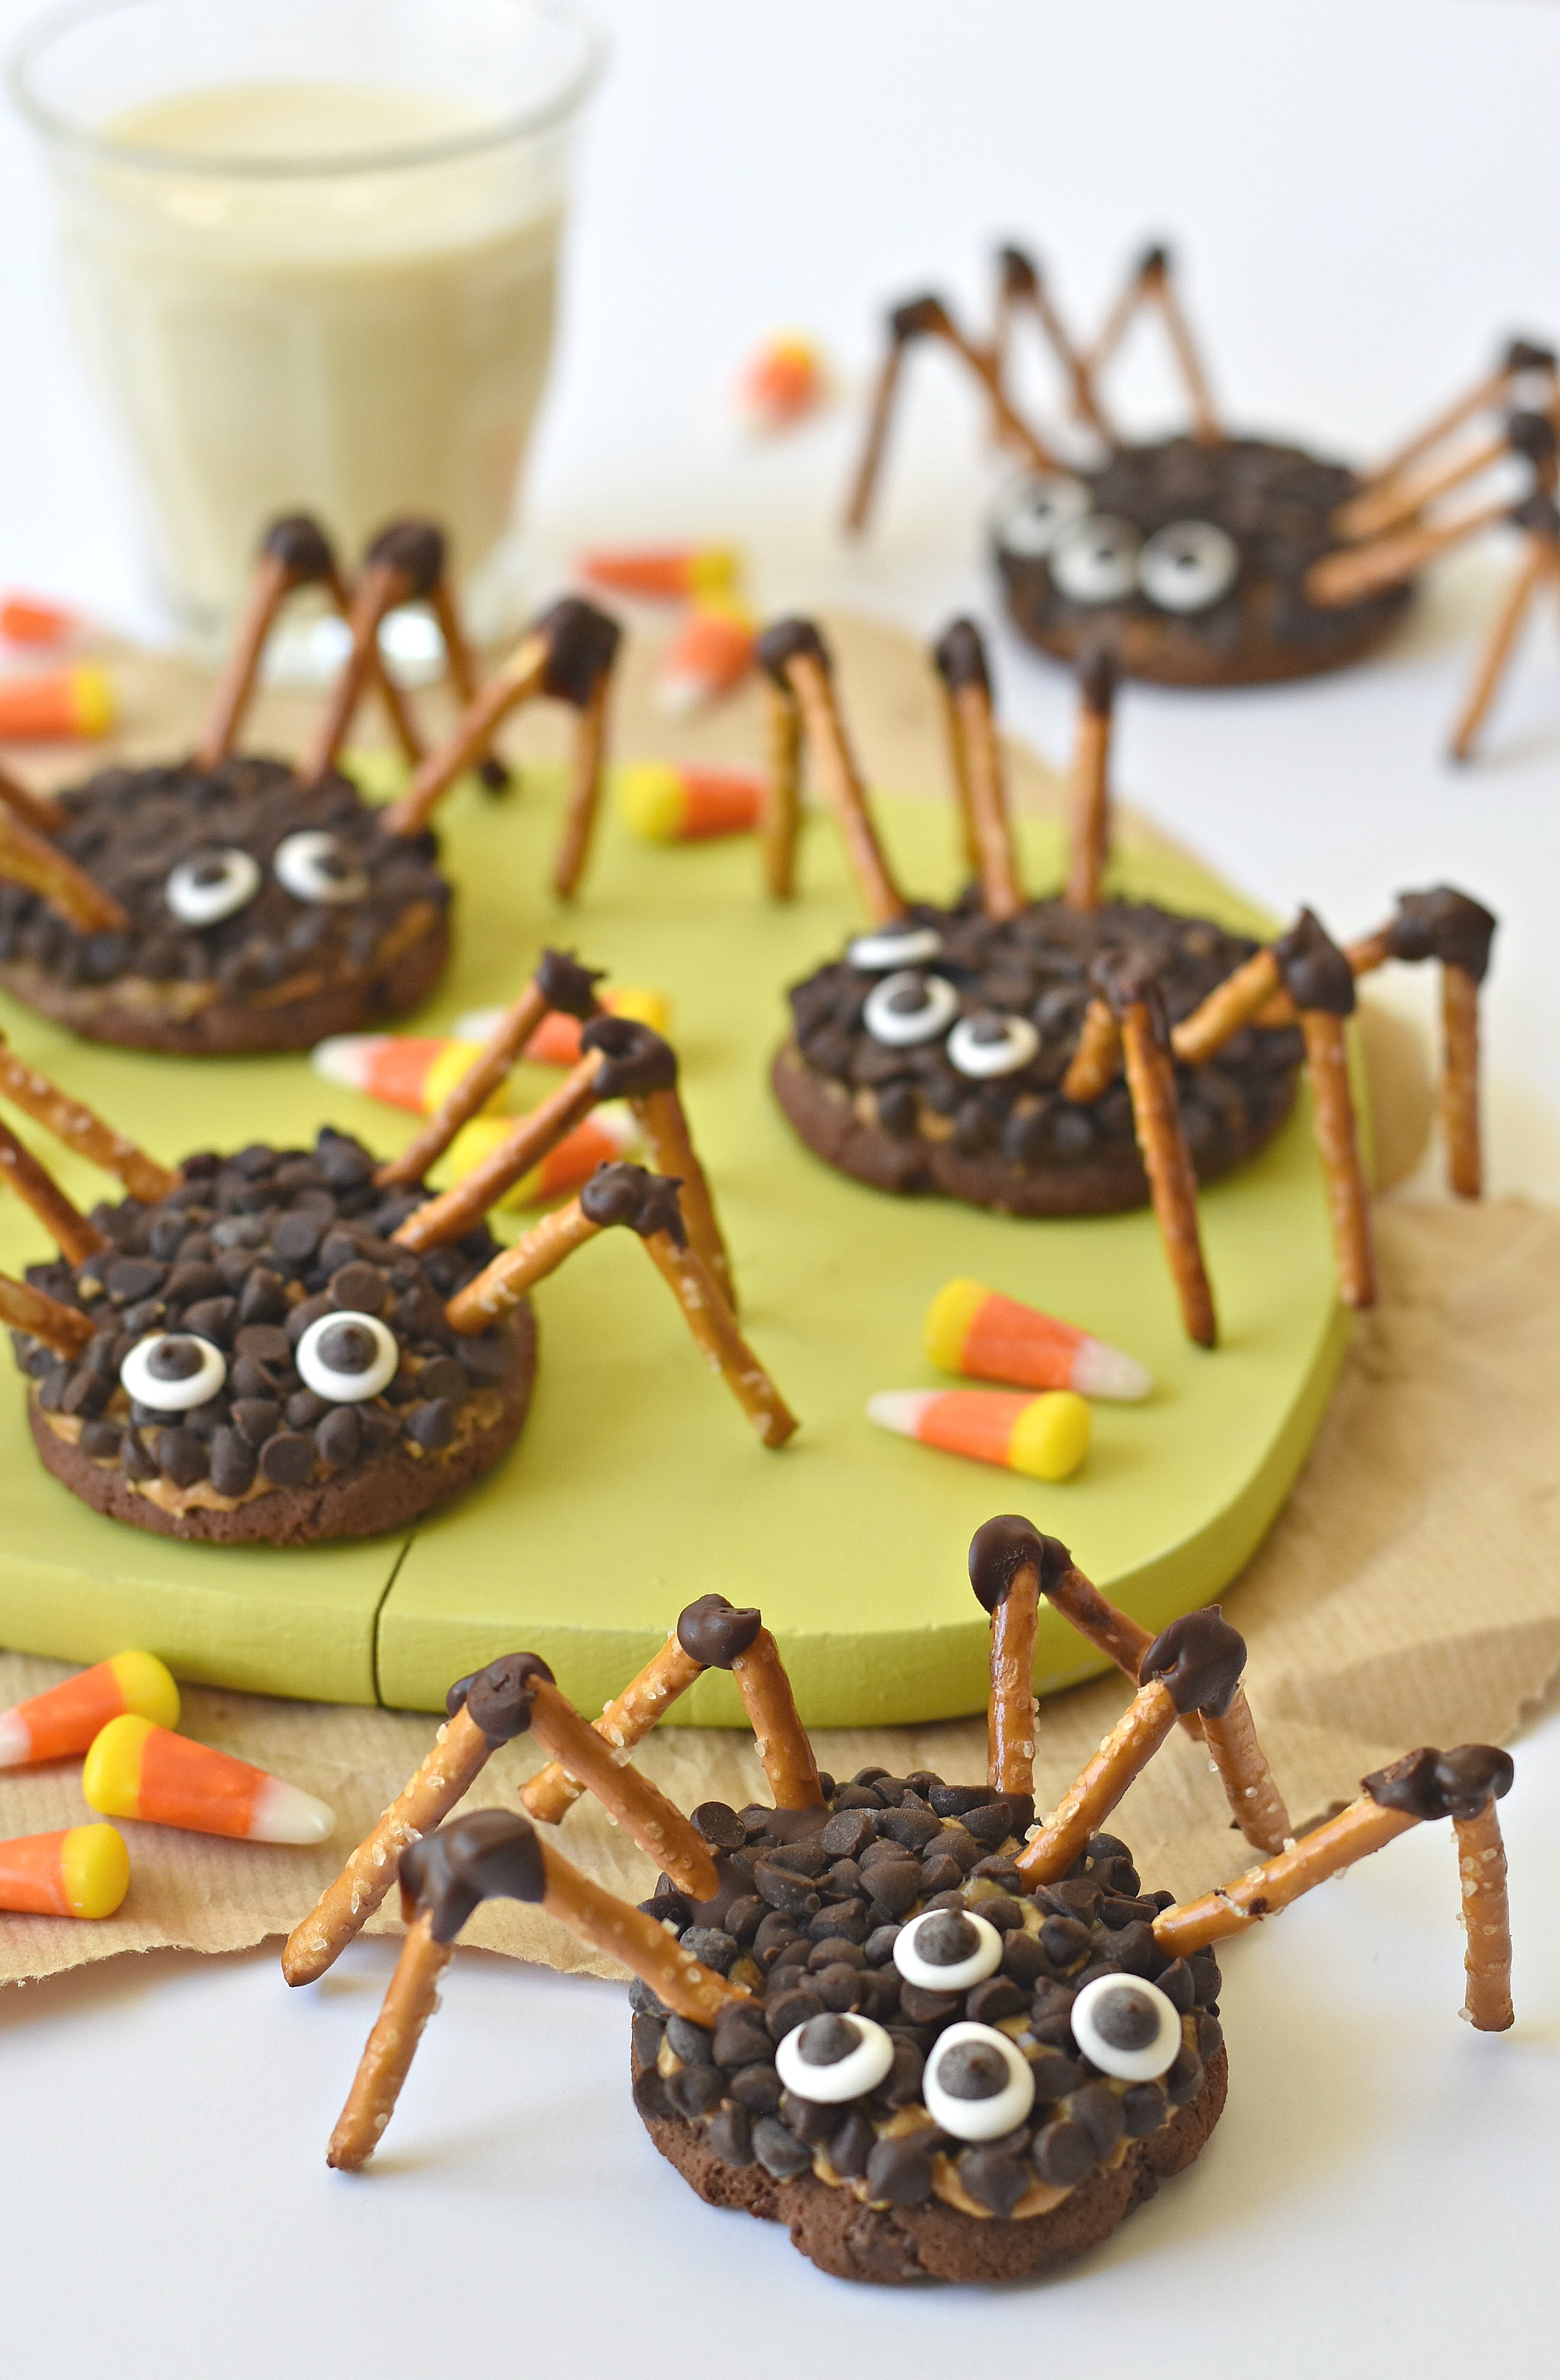 Your kitchen has been infested with the cutest and most edible ...